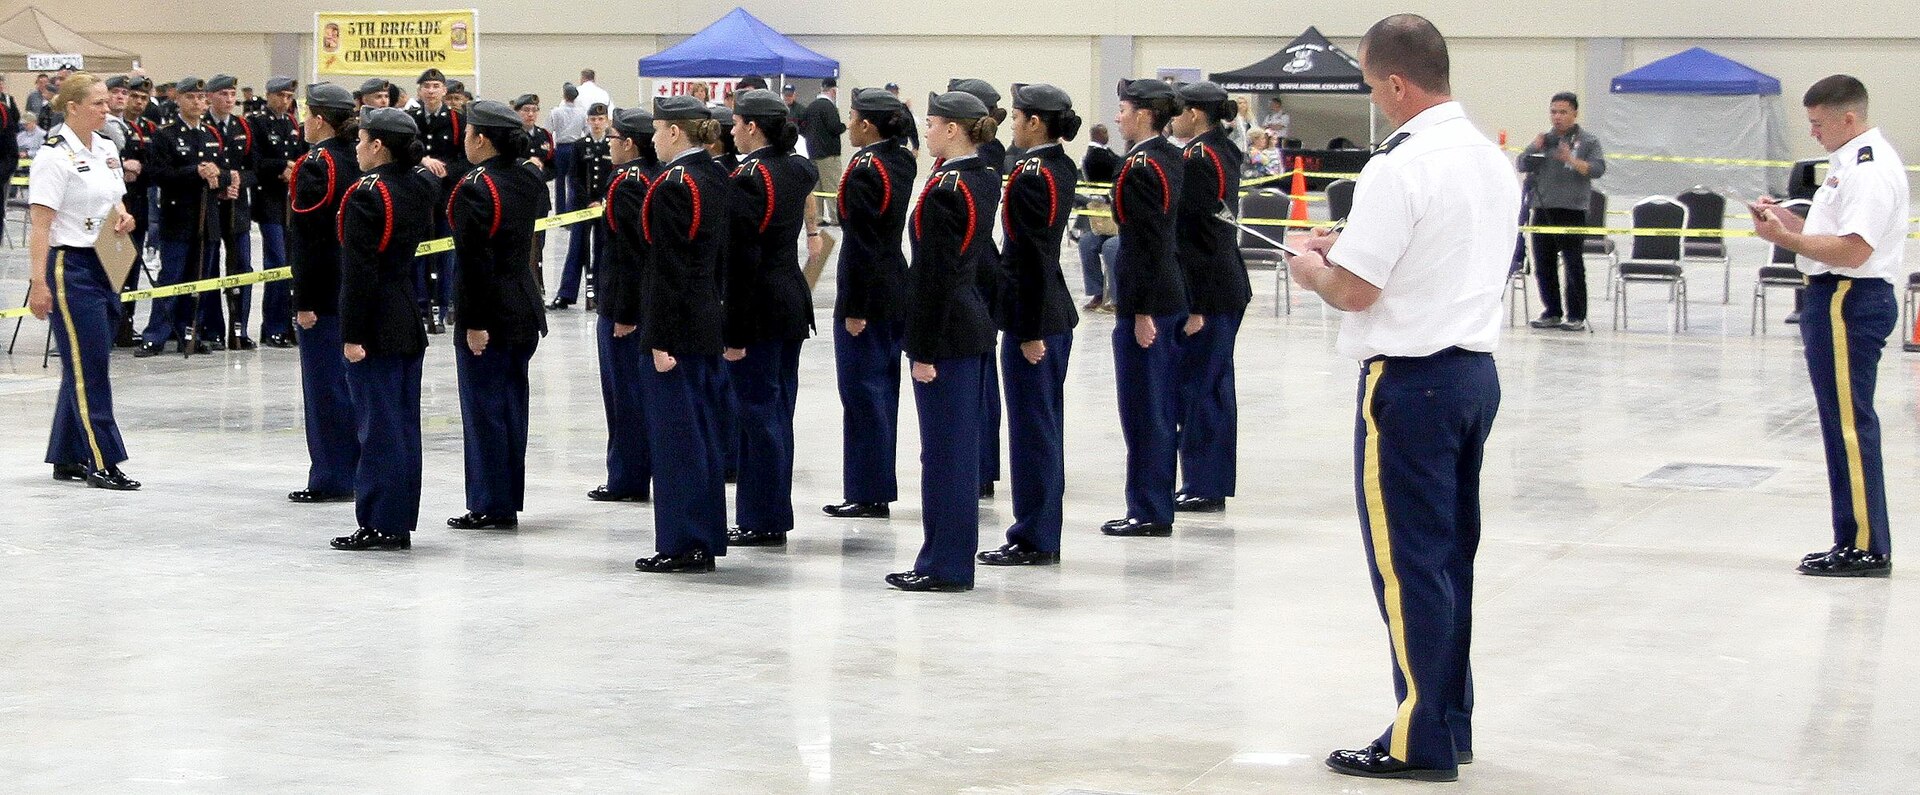 Junior ROTC cadets from San Antonio’s Ronald Reagan High School conclude their winning routine in the Unarmed Regulation Drill event during the 5th Brigade JROTC Drill Competition Feb. 6. Surrounding the formation are (from L to R) Master Sgt. Angela Cafferky, Sgt. Shawn Sarver, and Staff Sgt. Christian Hubbell, all NCOs assigned to Fort Sam Houston that served as judges for the competition.